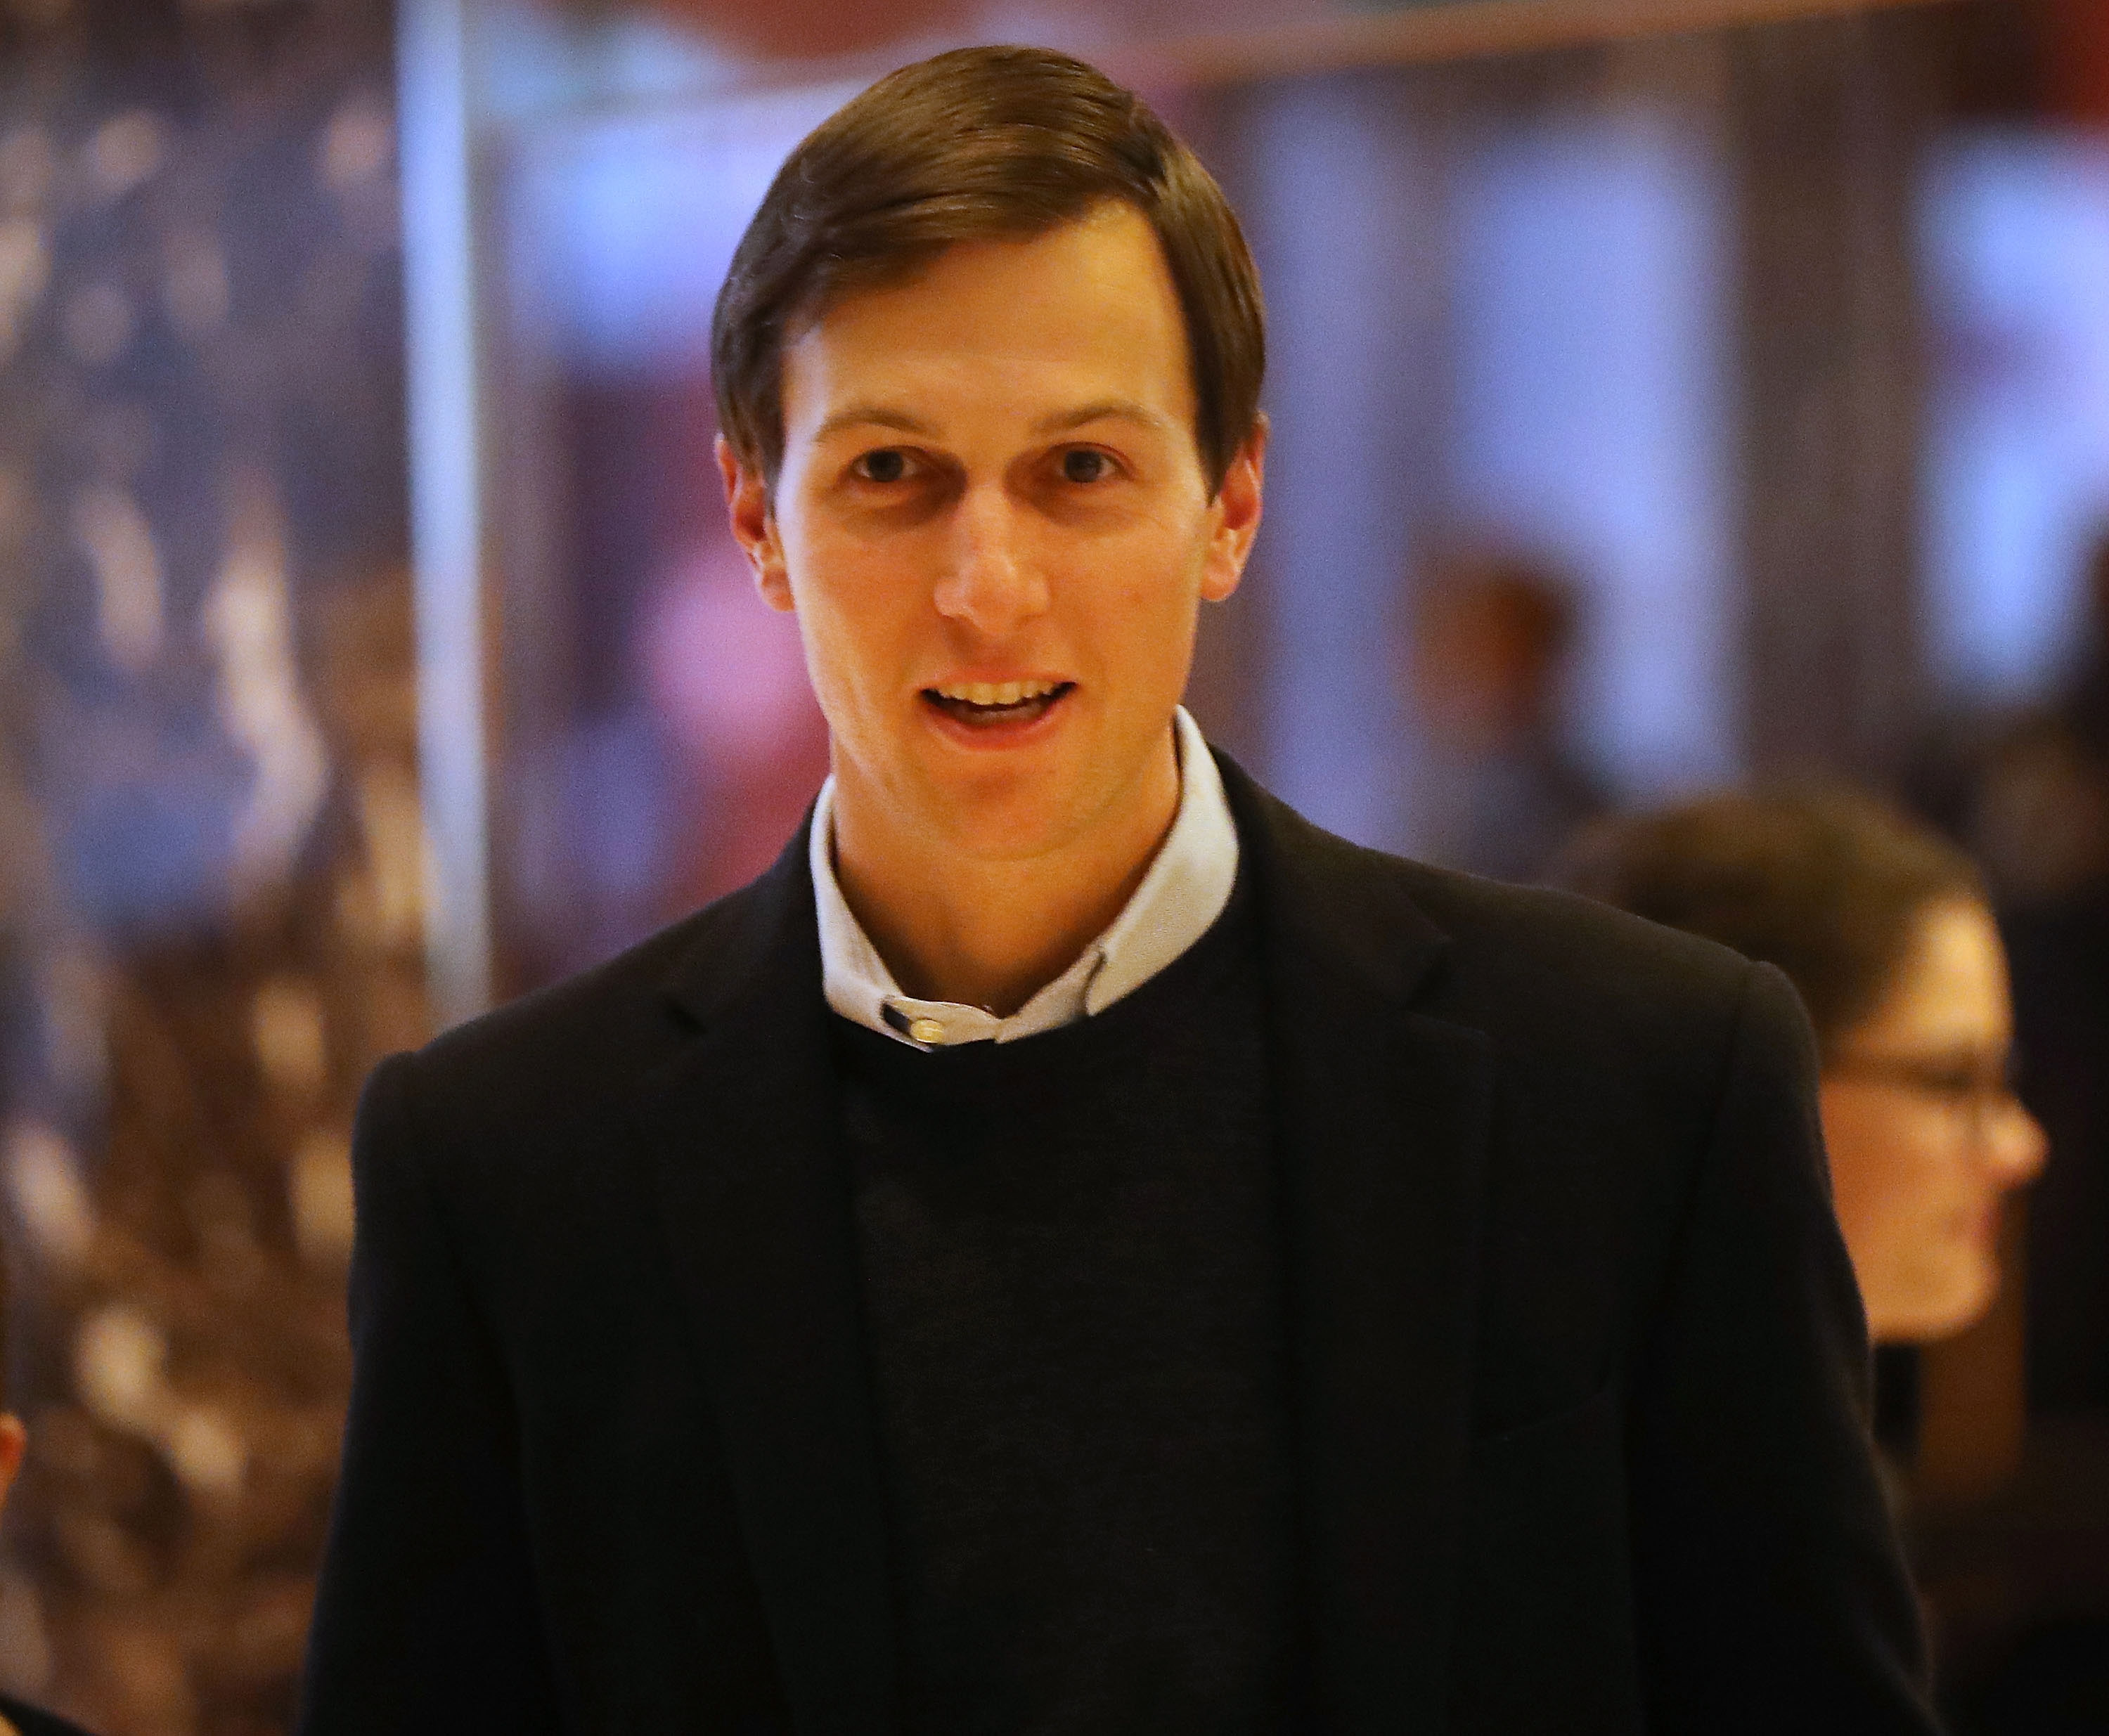 NEW YORK, NY - NOVEMBER 18: Jared Kushner, the son-in-law of President-elect Donald Trump, walks through the lobby of Trump Tower on November 18, 2016 in New York City. President-elect Trump and his transition team are in the process of filling cabinet and other high level positions for the new administration.   Spencer Platt/Getty Images/AFP